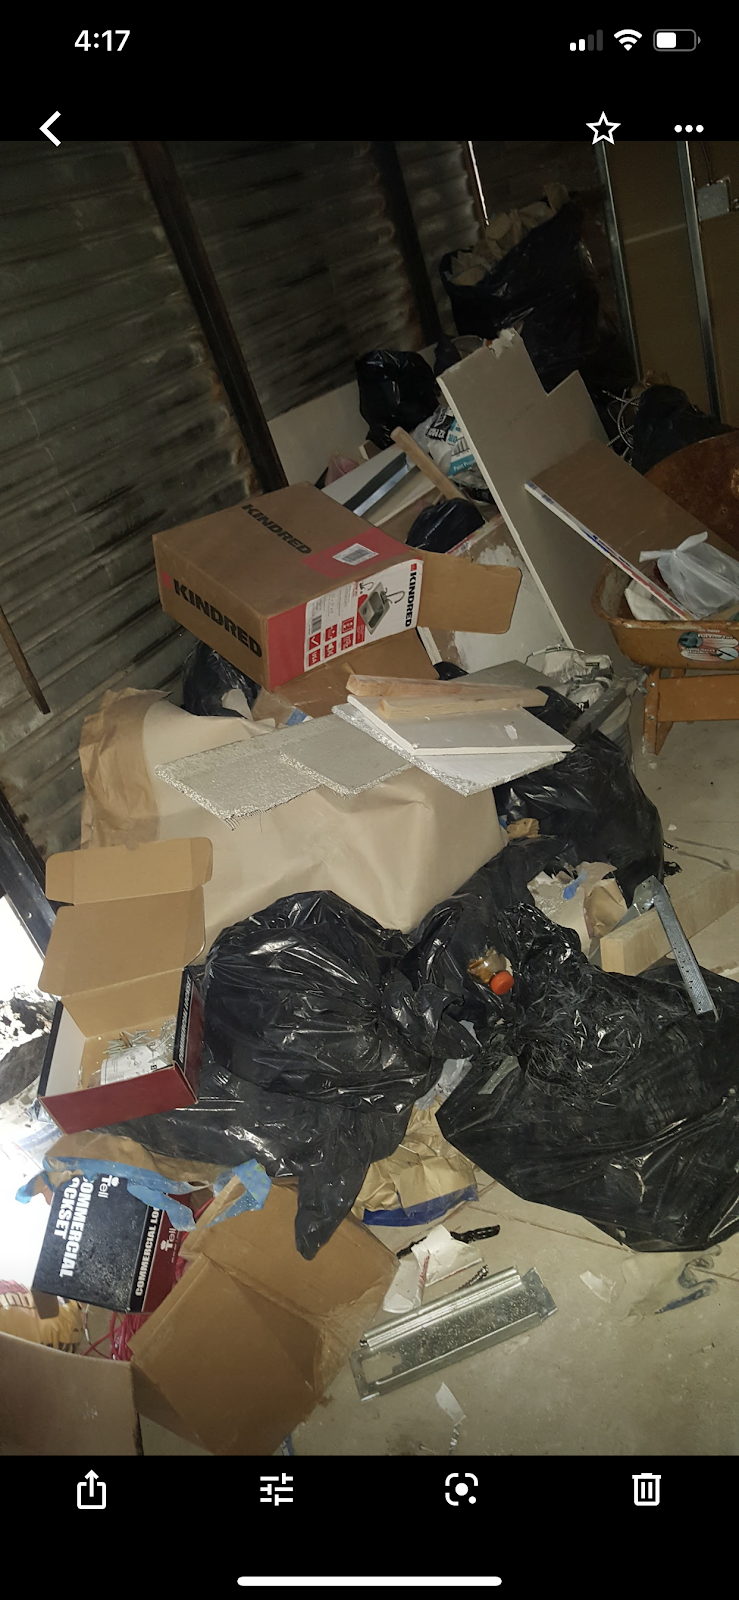 Reliable Moving & Junk Removal | 89-23 212th Pl, Queens, NY 11428 | Phone: (347) 279-0792